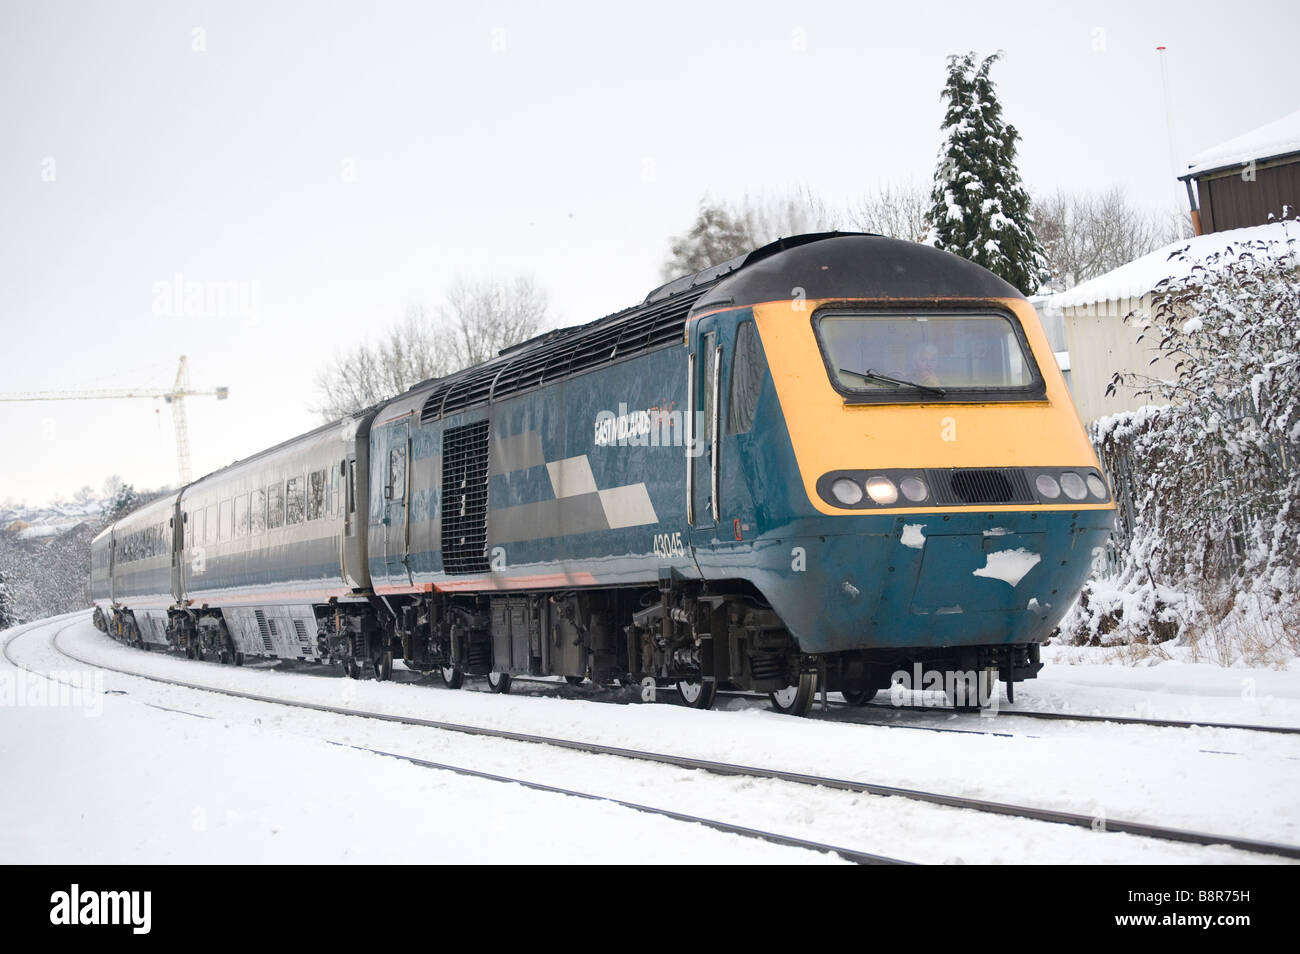 Class 43 125 hst high speed train in East Midlands Trains livery travelling through snow in the Leicestershire countryside. Stock Photo